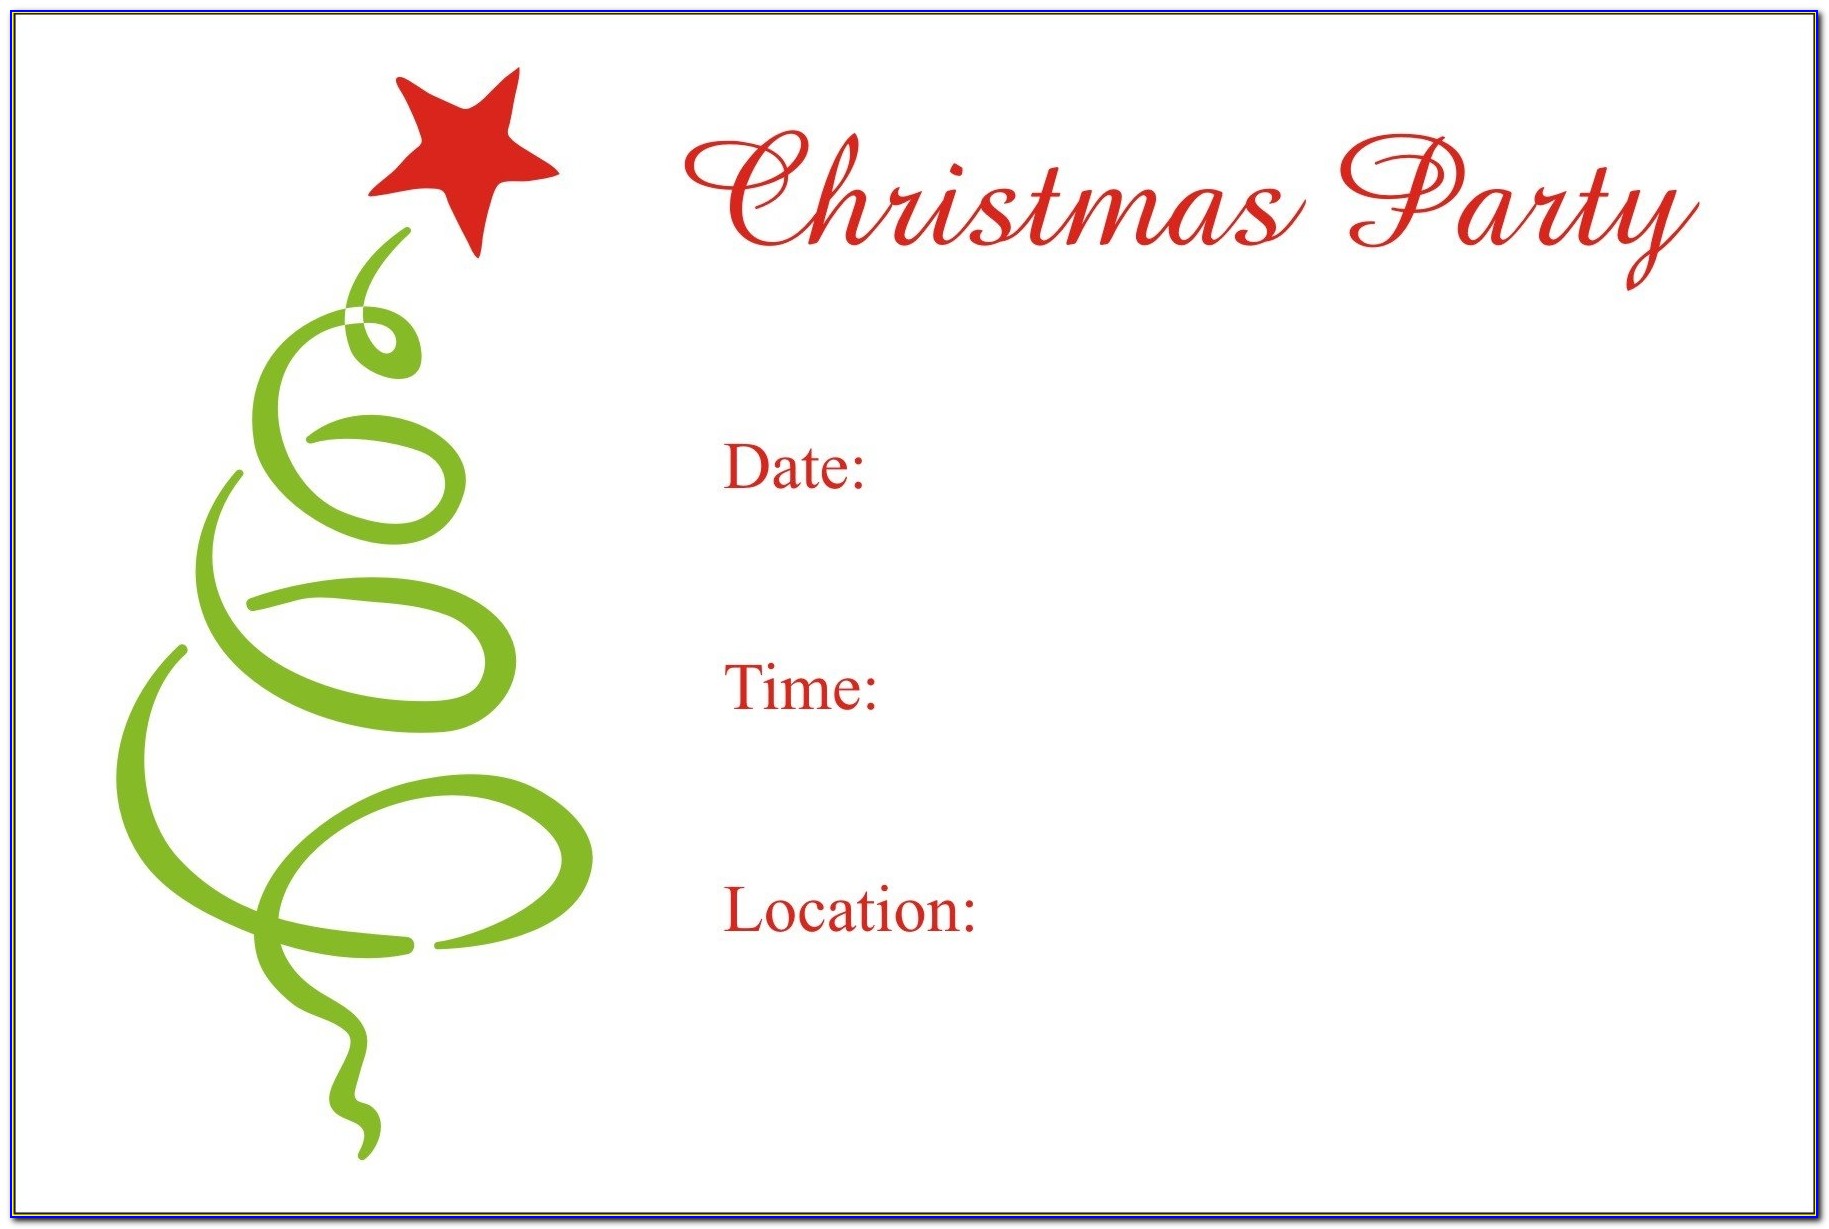 Christmas Invitations Online Free Targer.golden Dragon.co Intended For Holiday Party Invitation Template Word